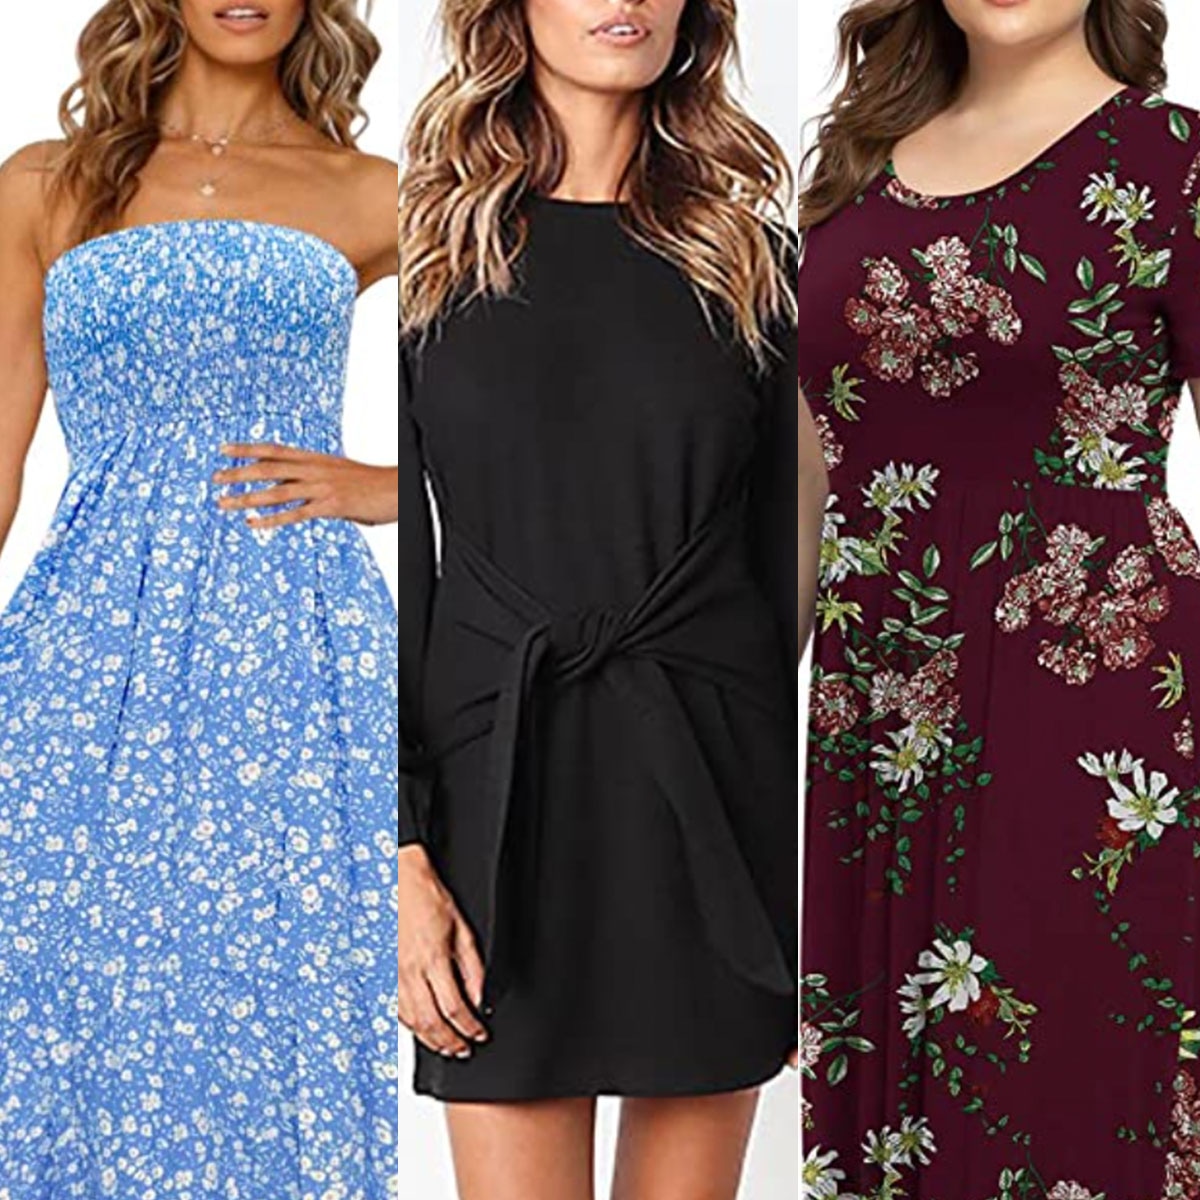 These Are 29 of the Most-Loved Dresses on Amazon - E! Online